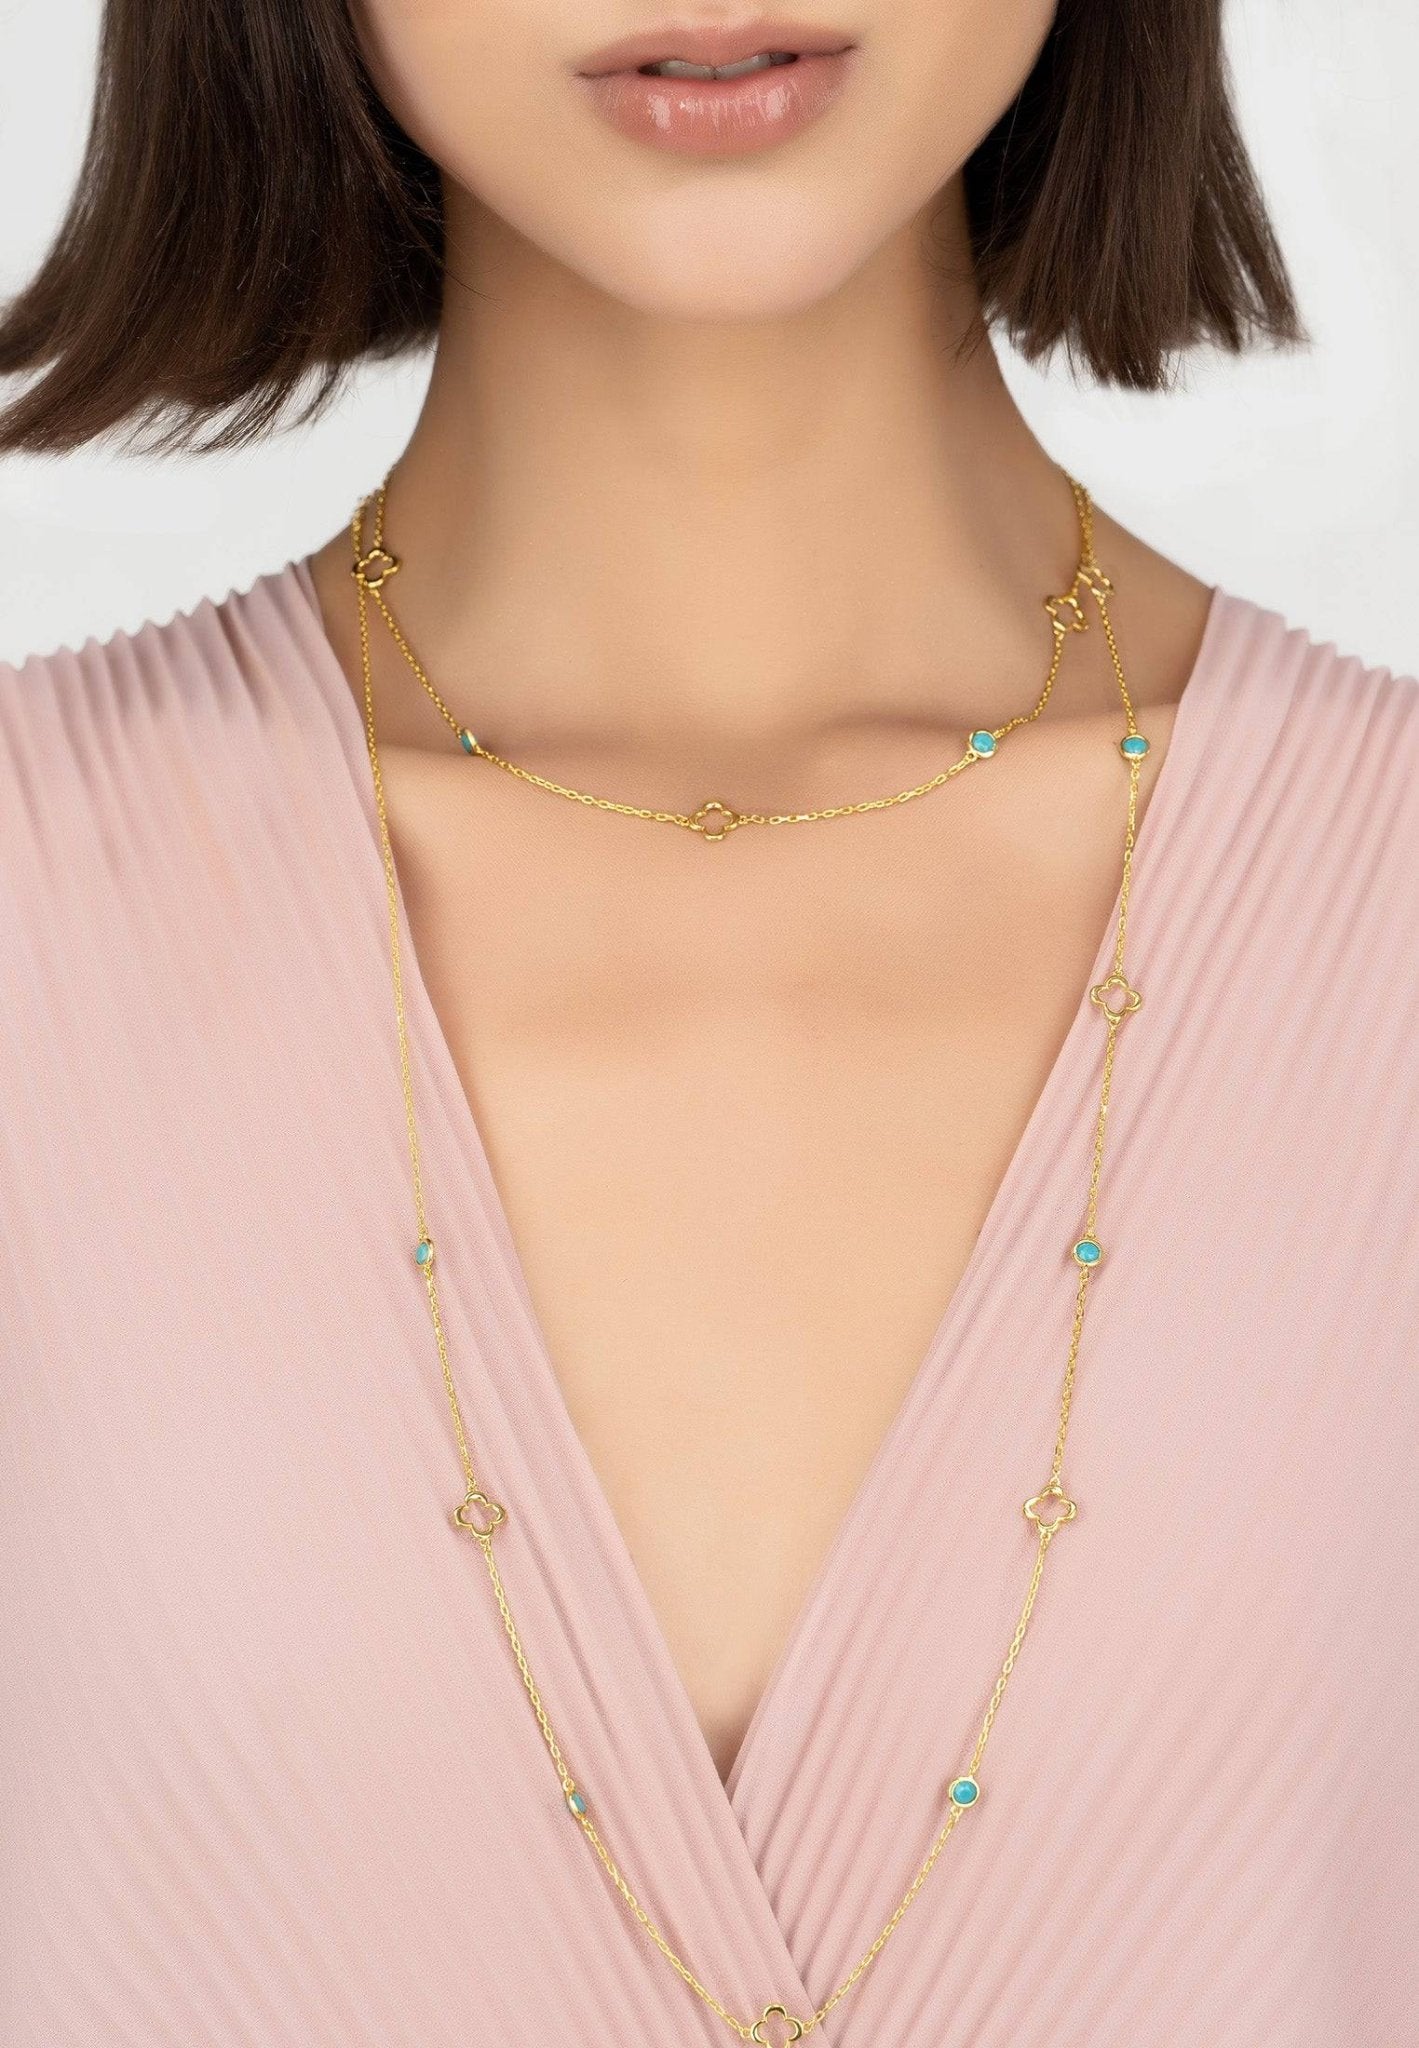 Open Clover Long Gemstone Necklace Gold Turquoise - LATELITA Necklaces